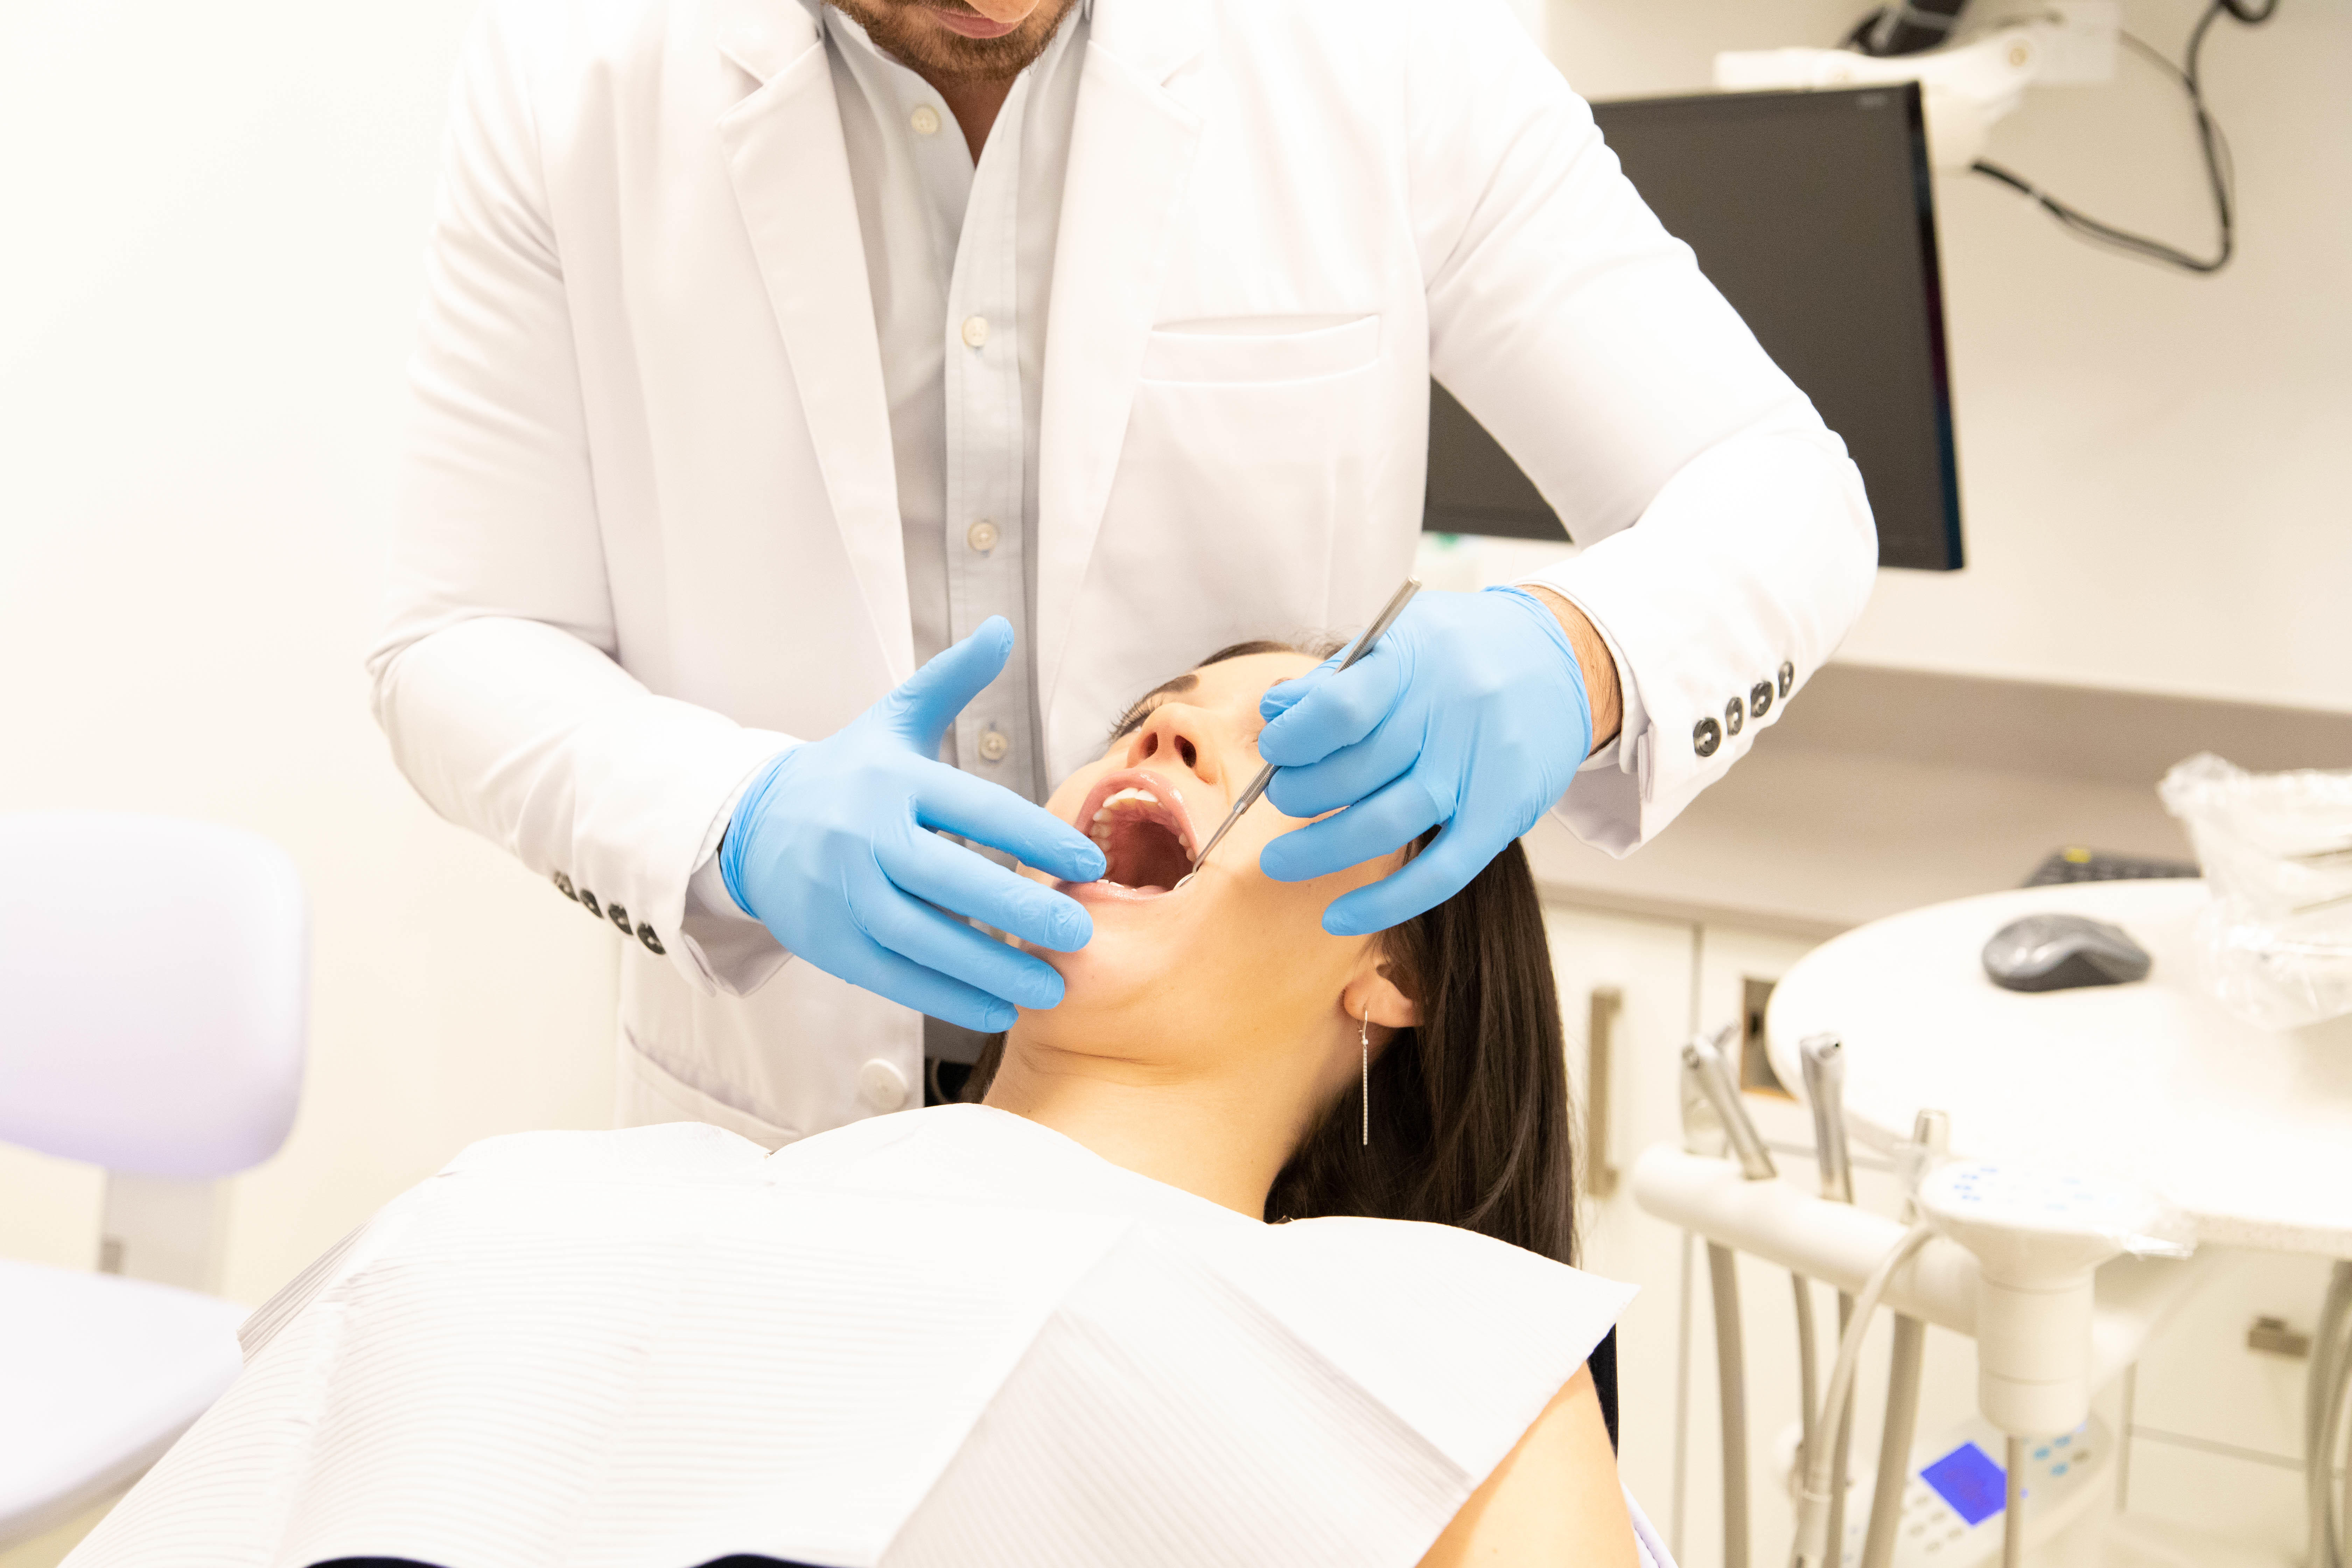 Our experienced orthodontist, Dr. Hamid Barkhordar, works with each patient to develop your customiz Orthodontics of Torrance Torrance (424)201-0712